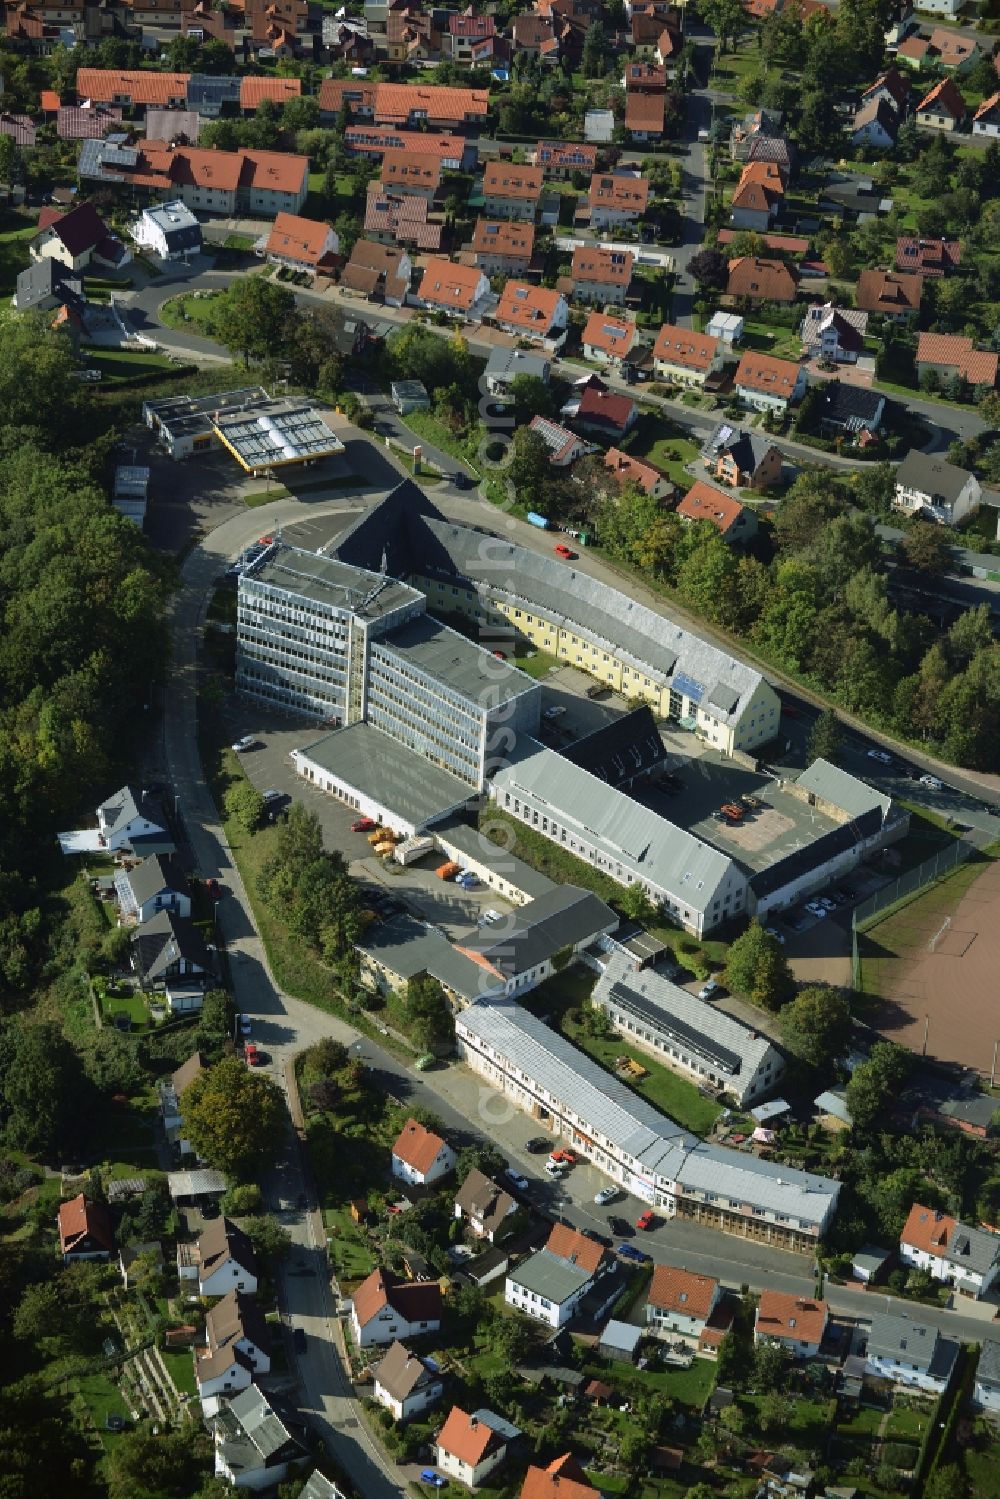 Suhl from the bird's eye view: Administrative building of the State Authority School Administration offices in Suhl in the state of Thuringia